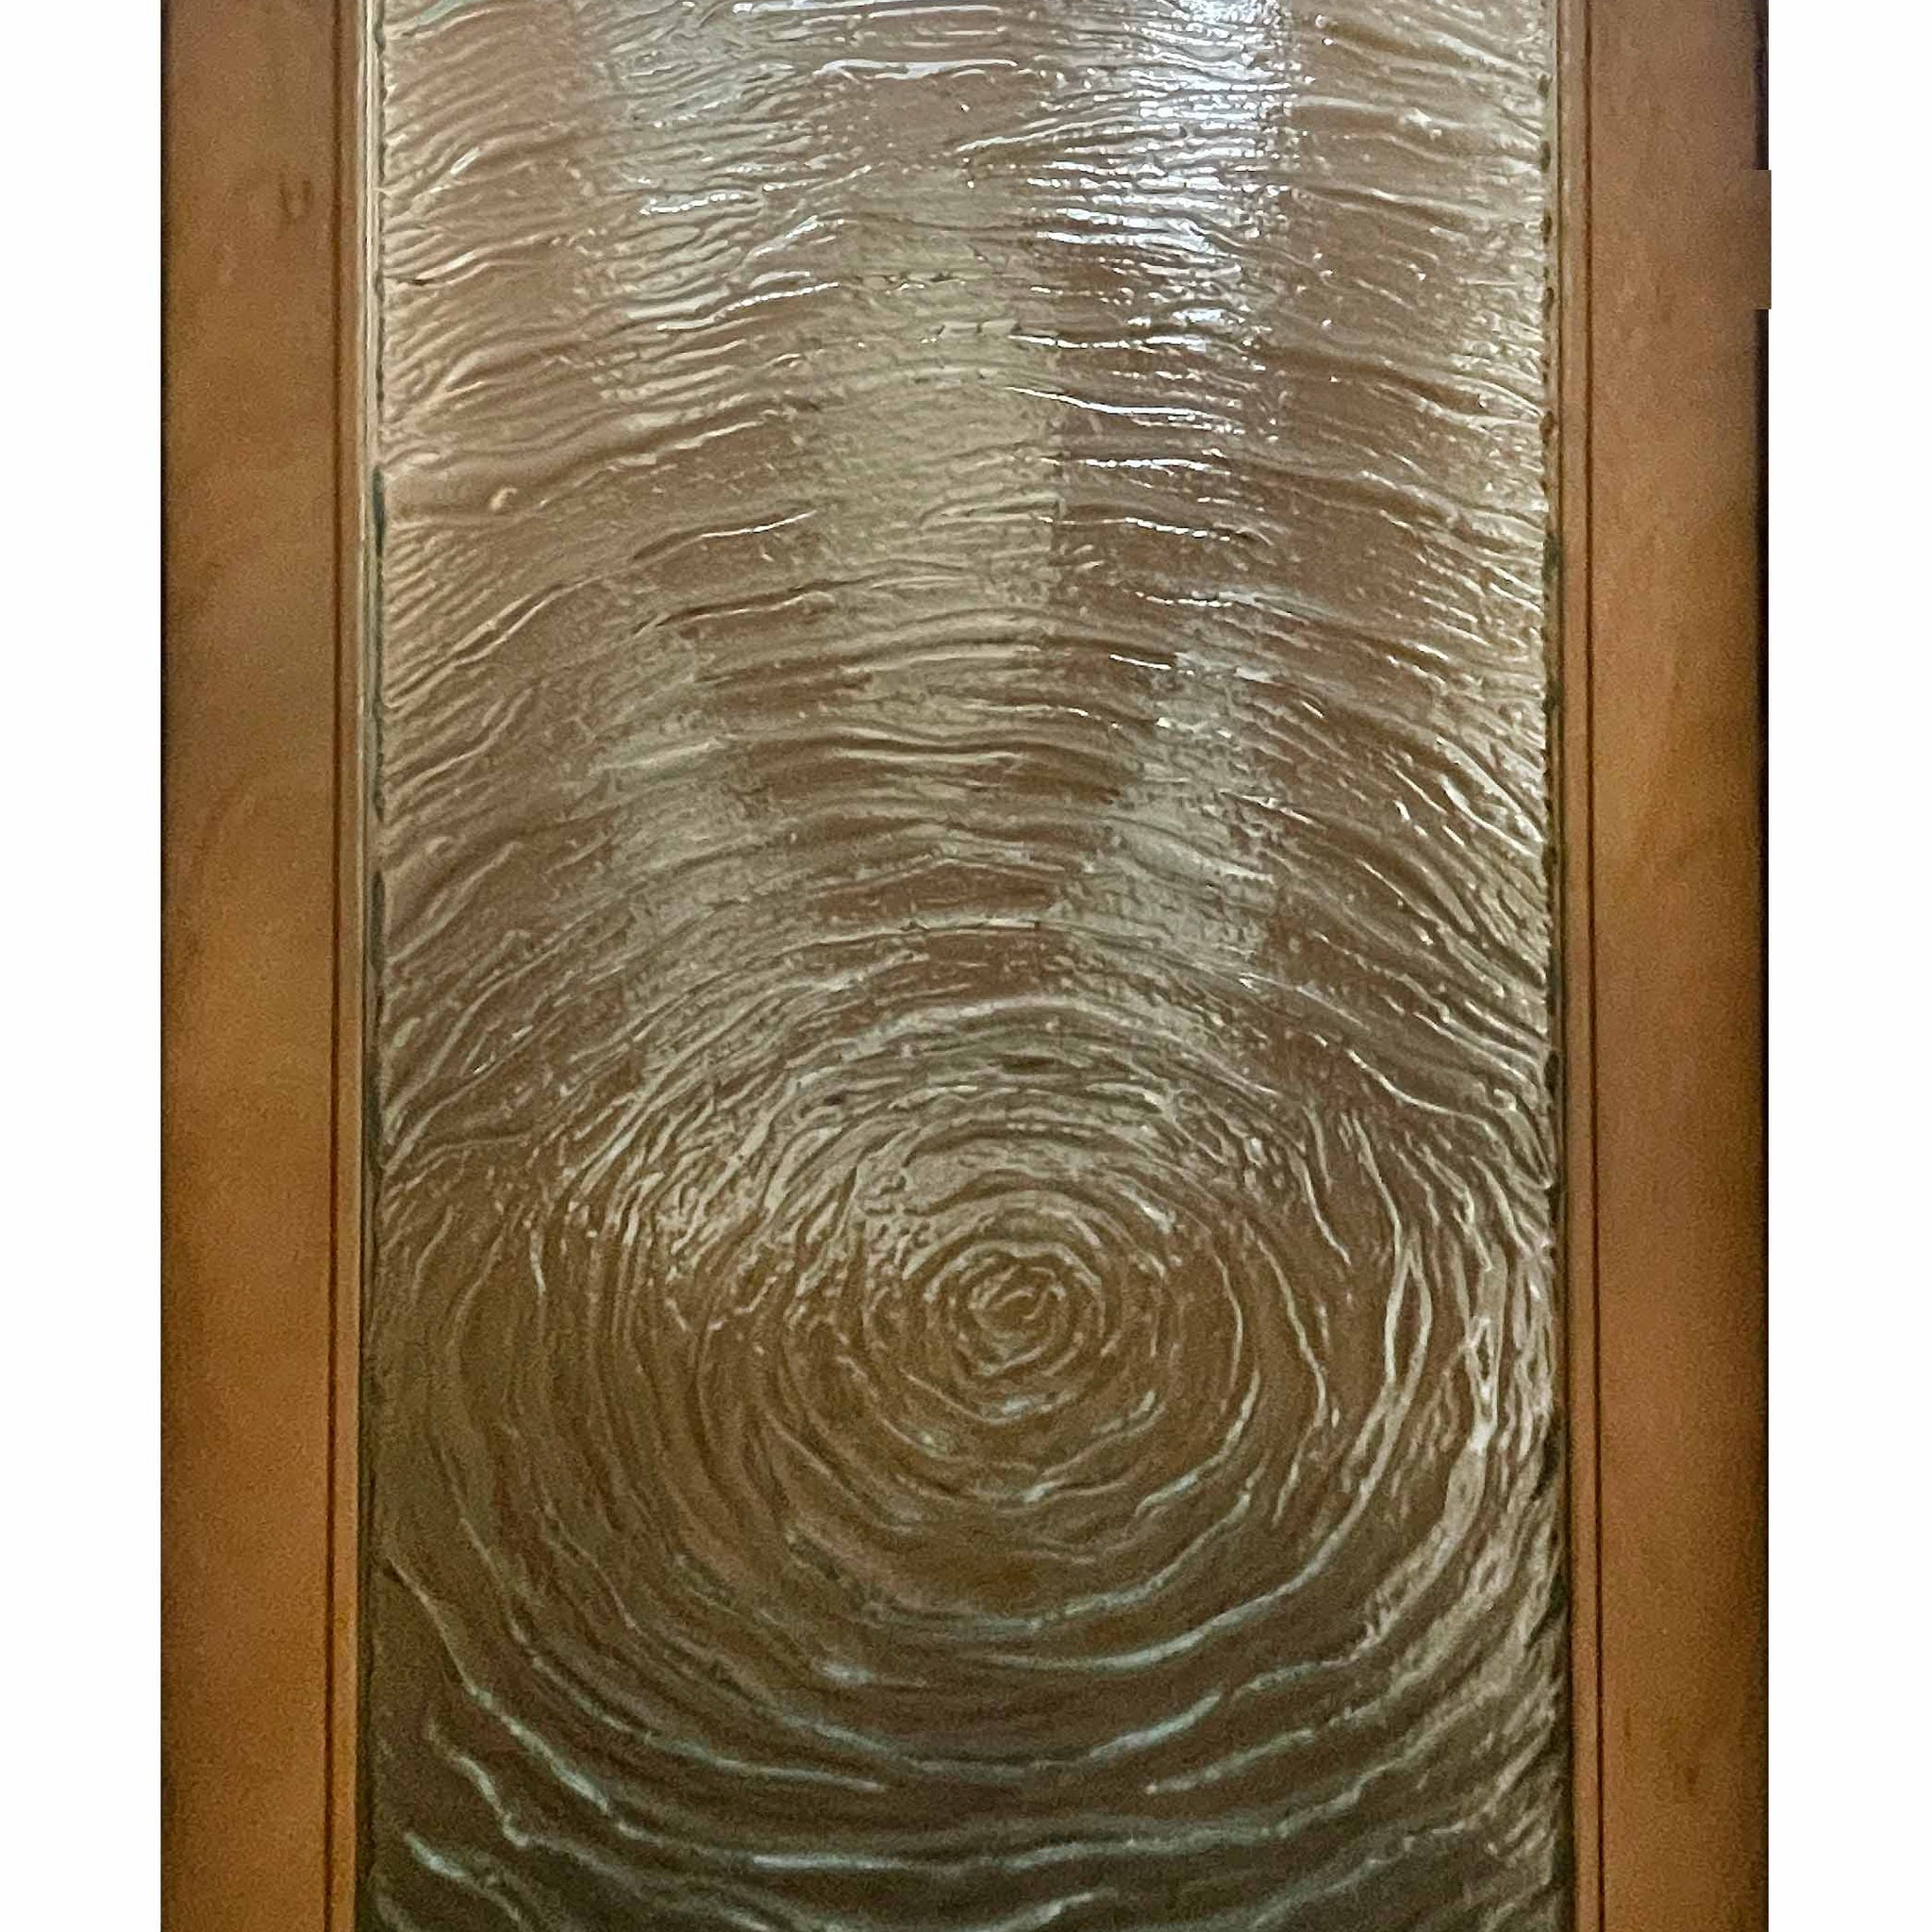 3ft. x 6 ft. 8 in. Mahogany 1 Lite Door Slab With Decorative Glass